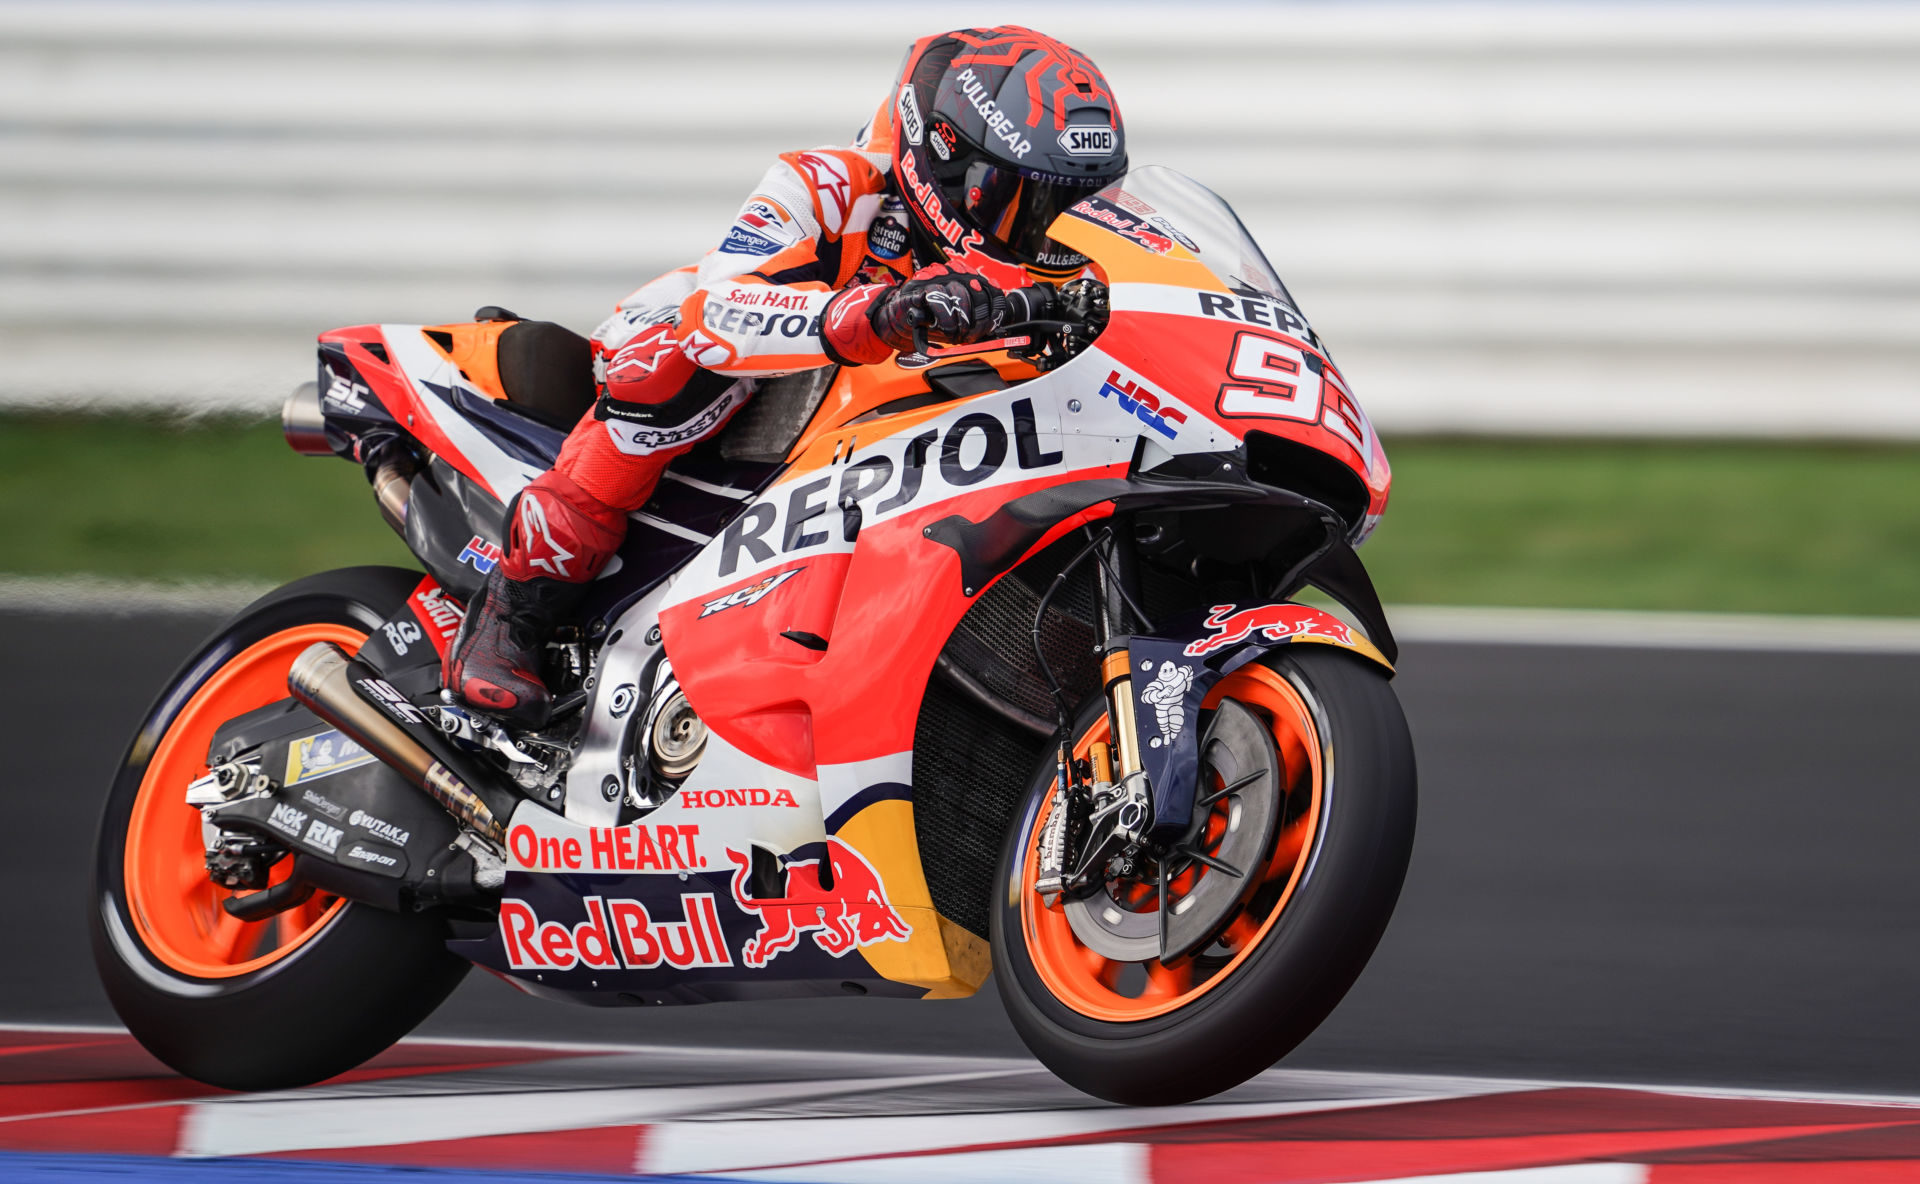 Marc Márquez returns at historic 1000th GP in France - WE ARE 93